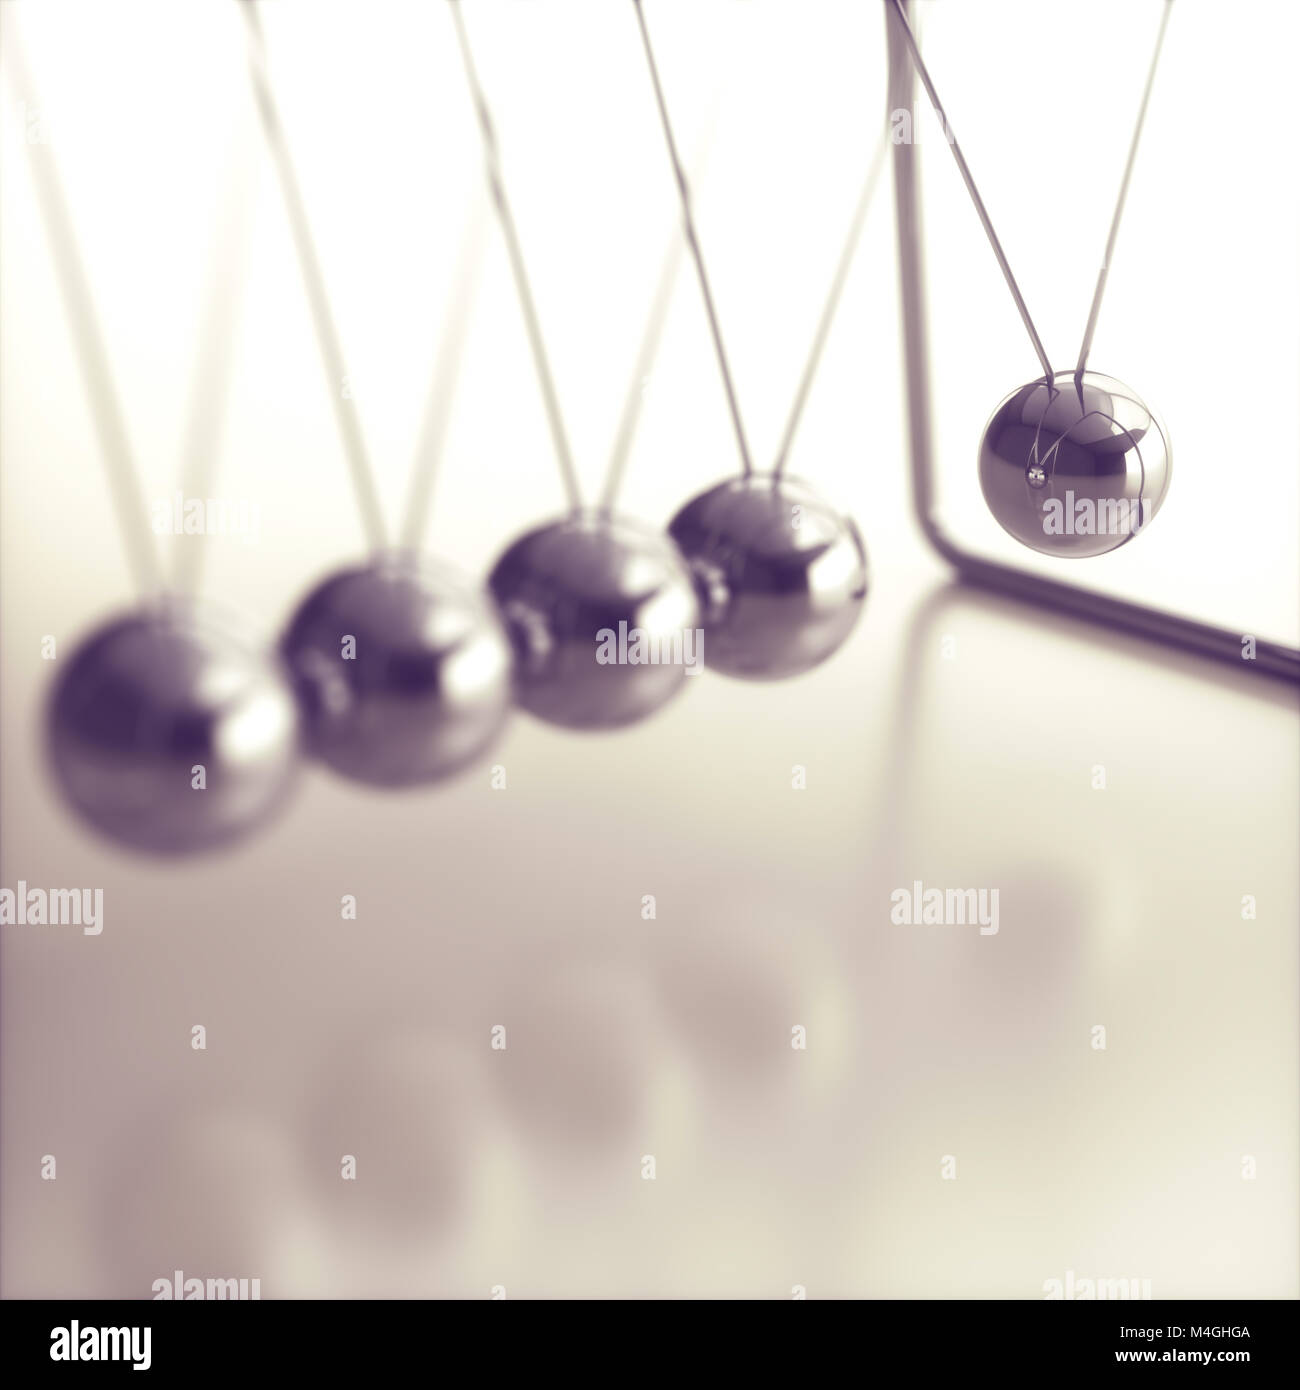 3D illustration of Newton's cradle, concept of conservation of momentum and energy. Stock Photo